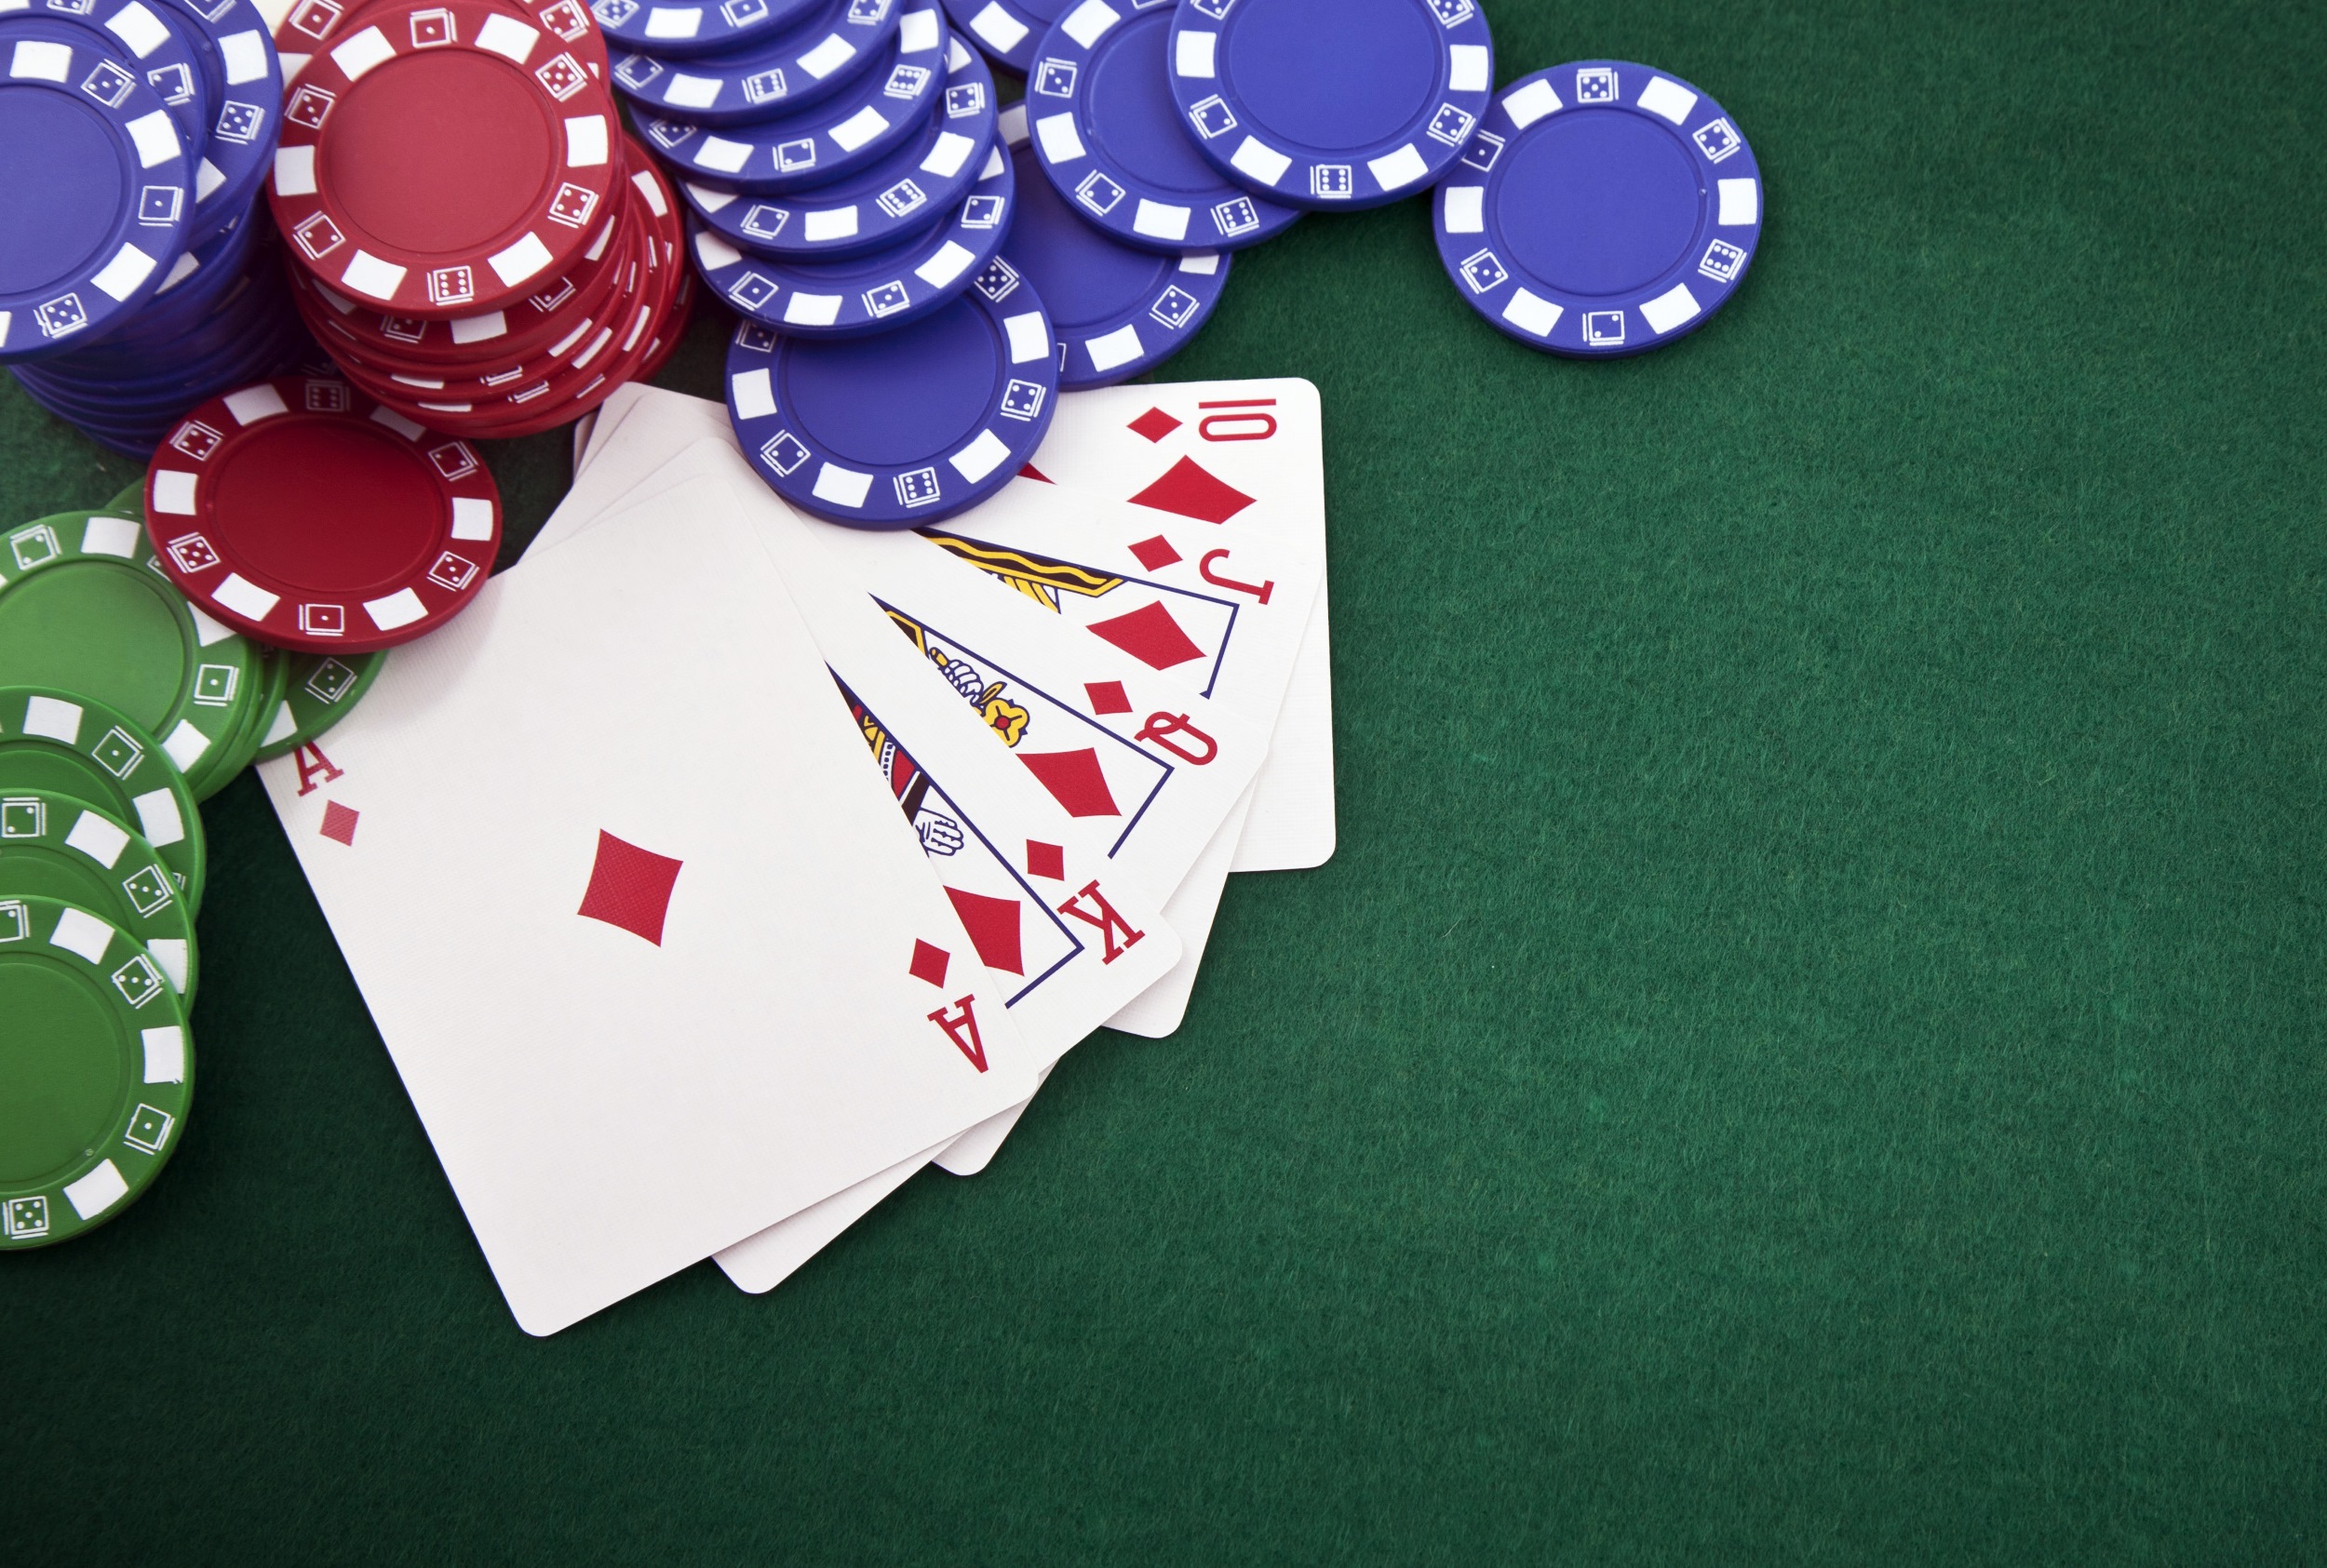 Risk Of Online Gambling In The United States